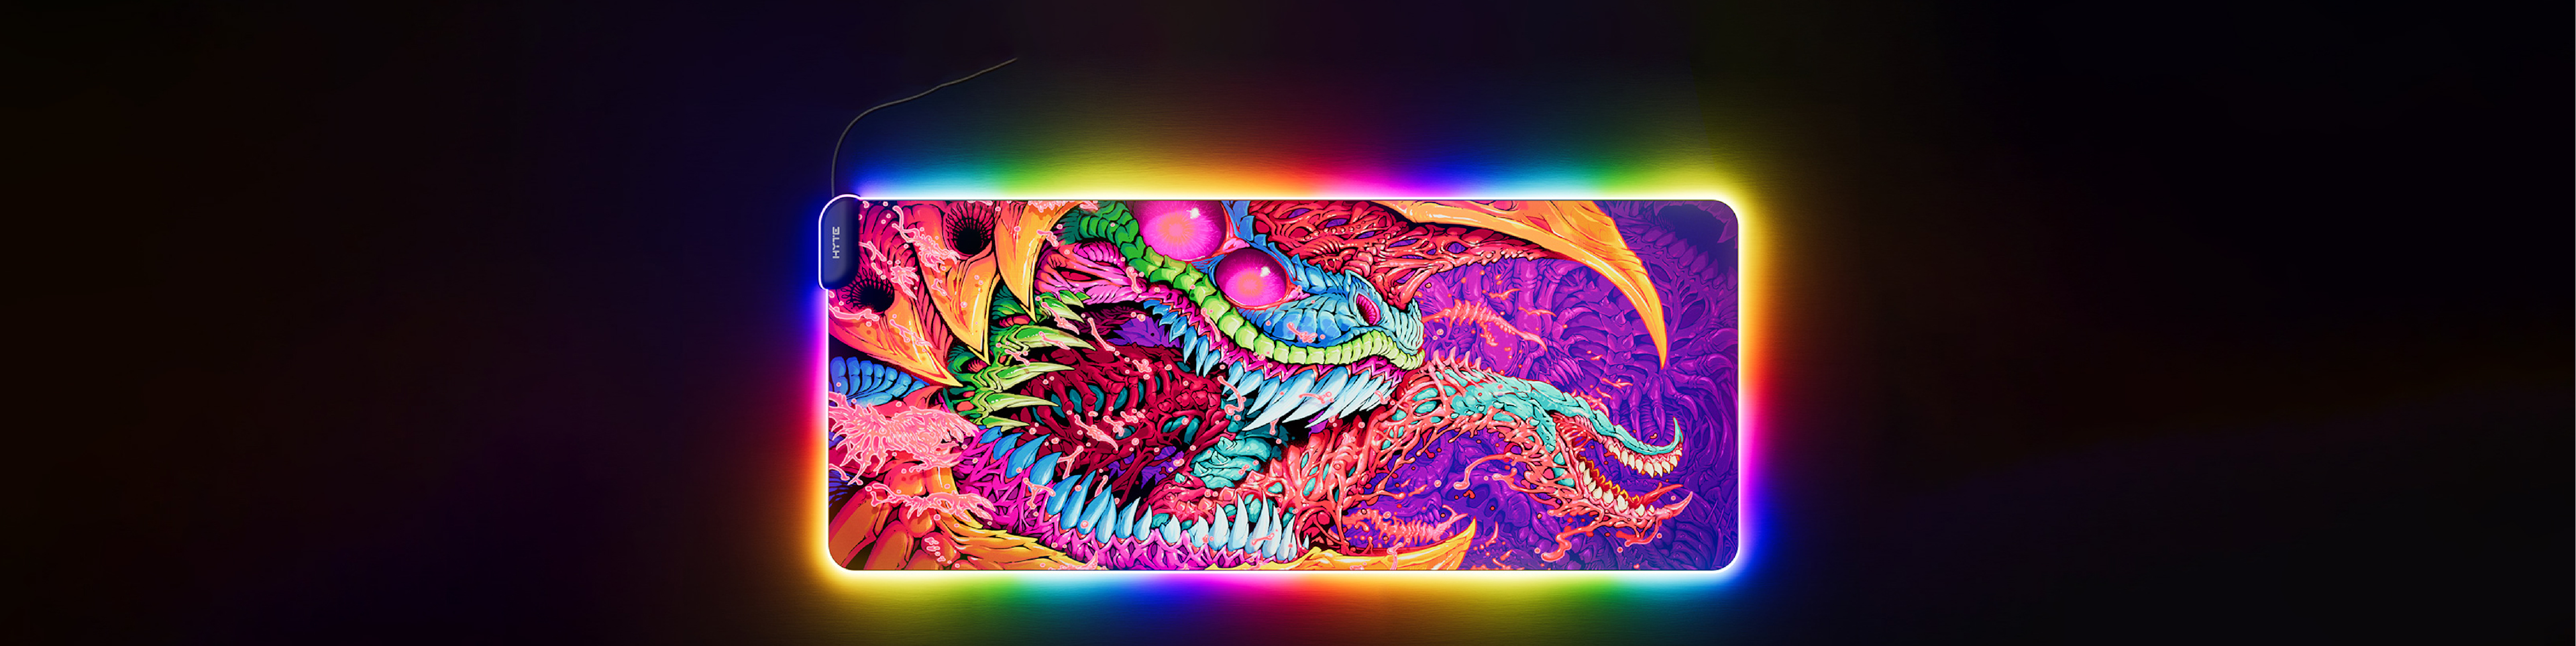 Hyper Beast 2 Limited Edition CNVS